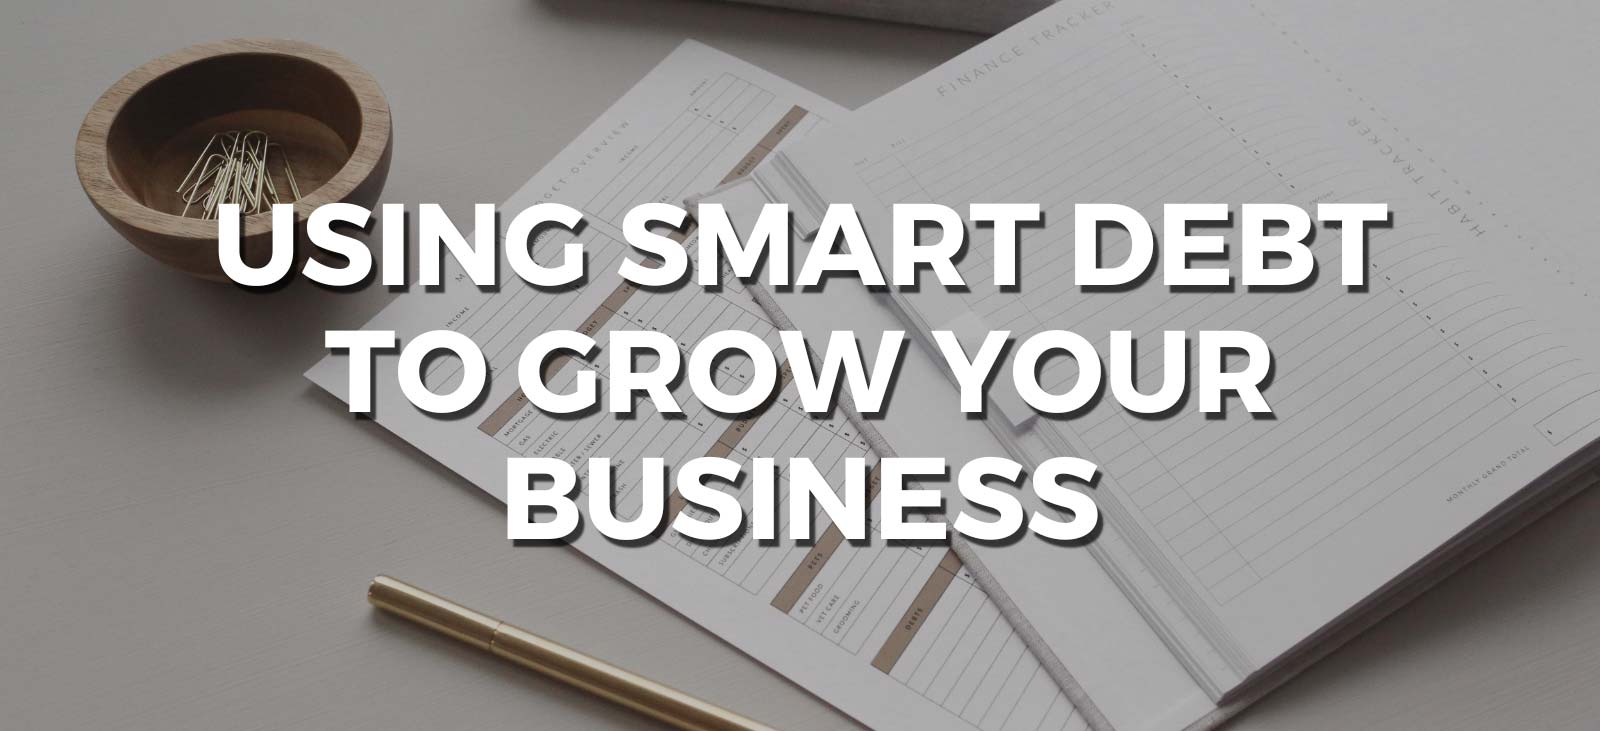 using smart debt to grow your business